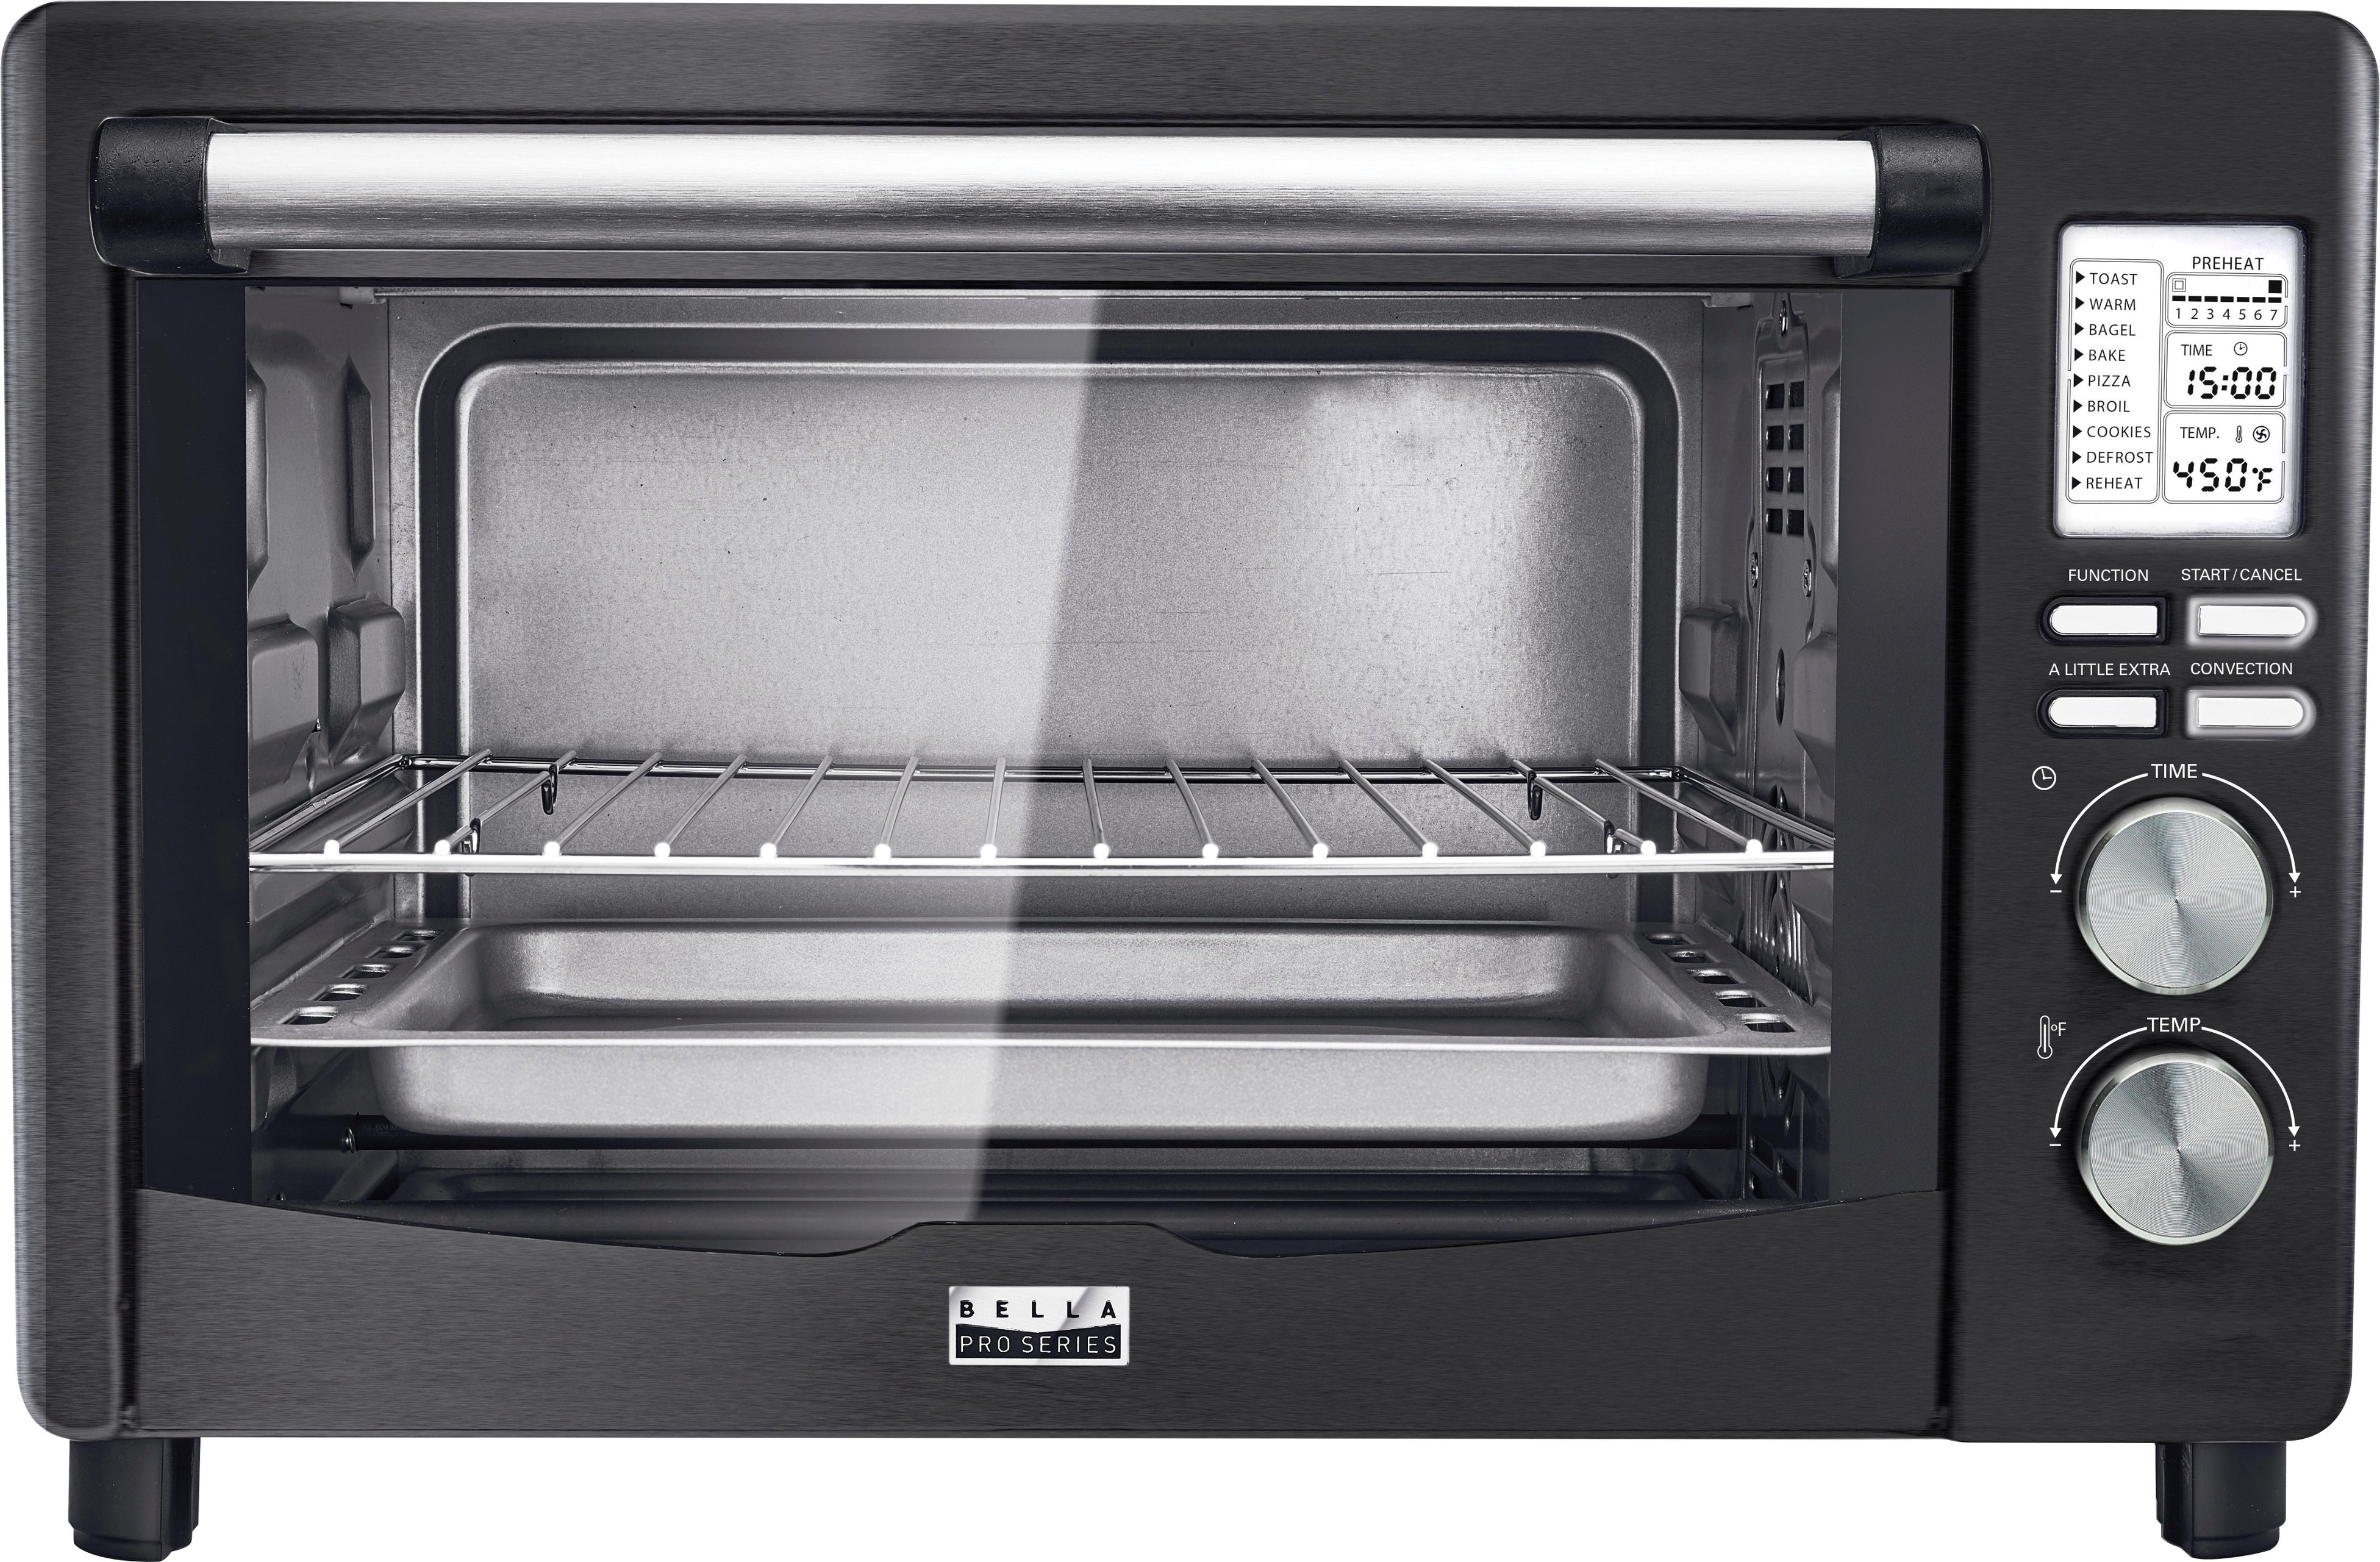 1200W 6-Slice Stainless Steel Black Toaster Oven with 20L Capacity Cou